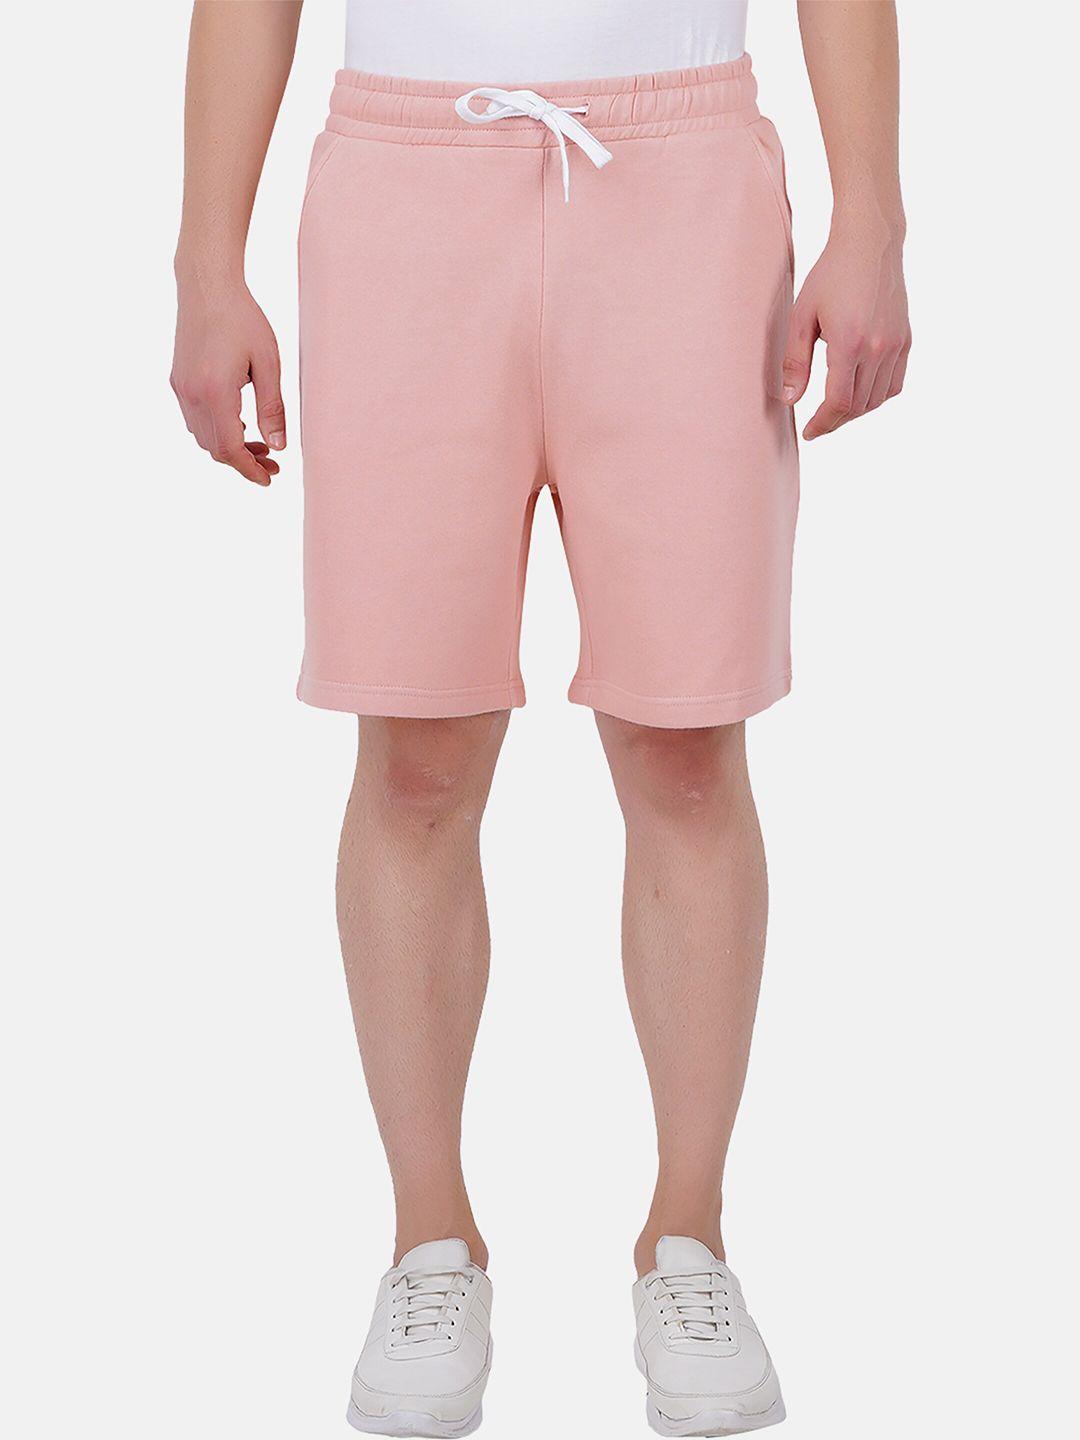 smugglerz inc. men pink solid pure cotton boxers